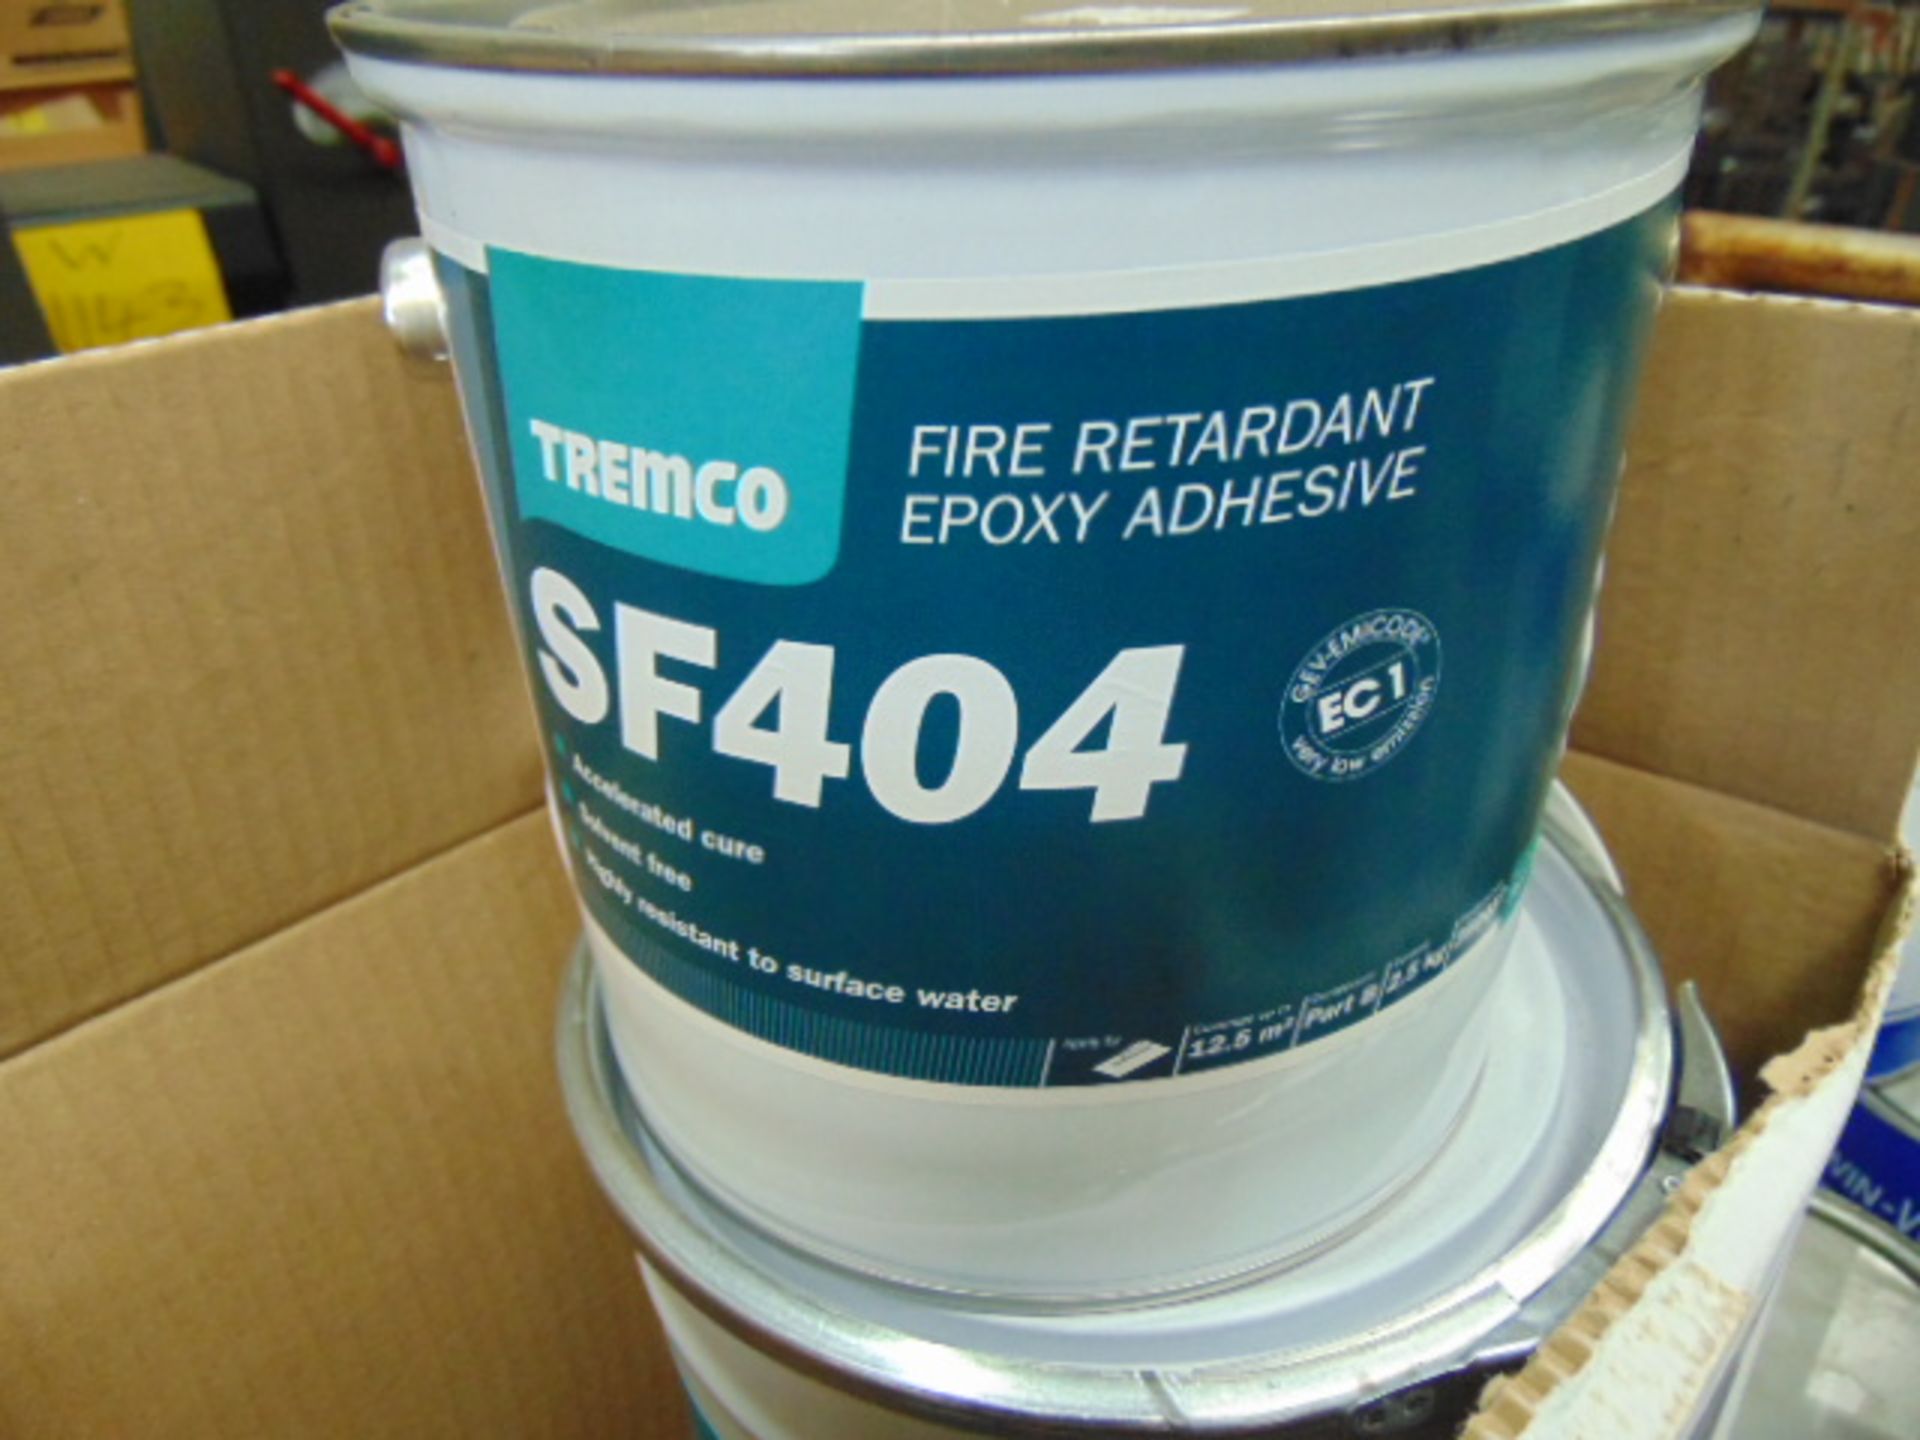 3 x Unissued Tremco SF404 Fire Retardent Epoxy Adhesive as shown - Image 4 of 4